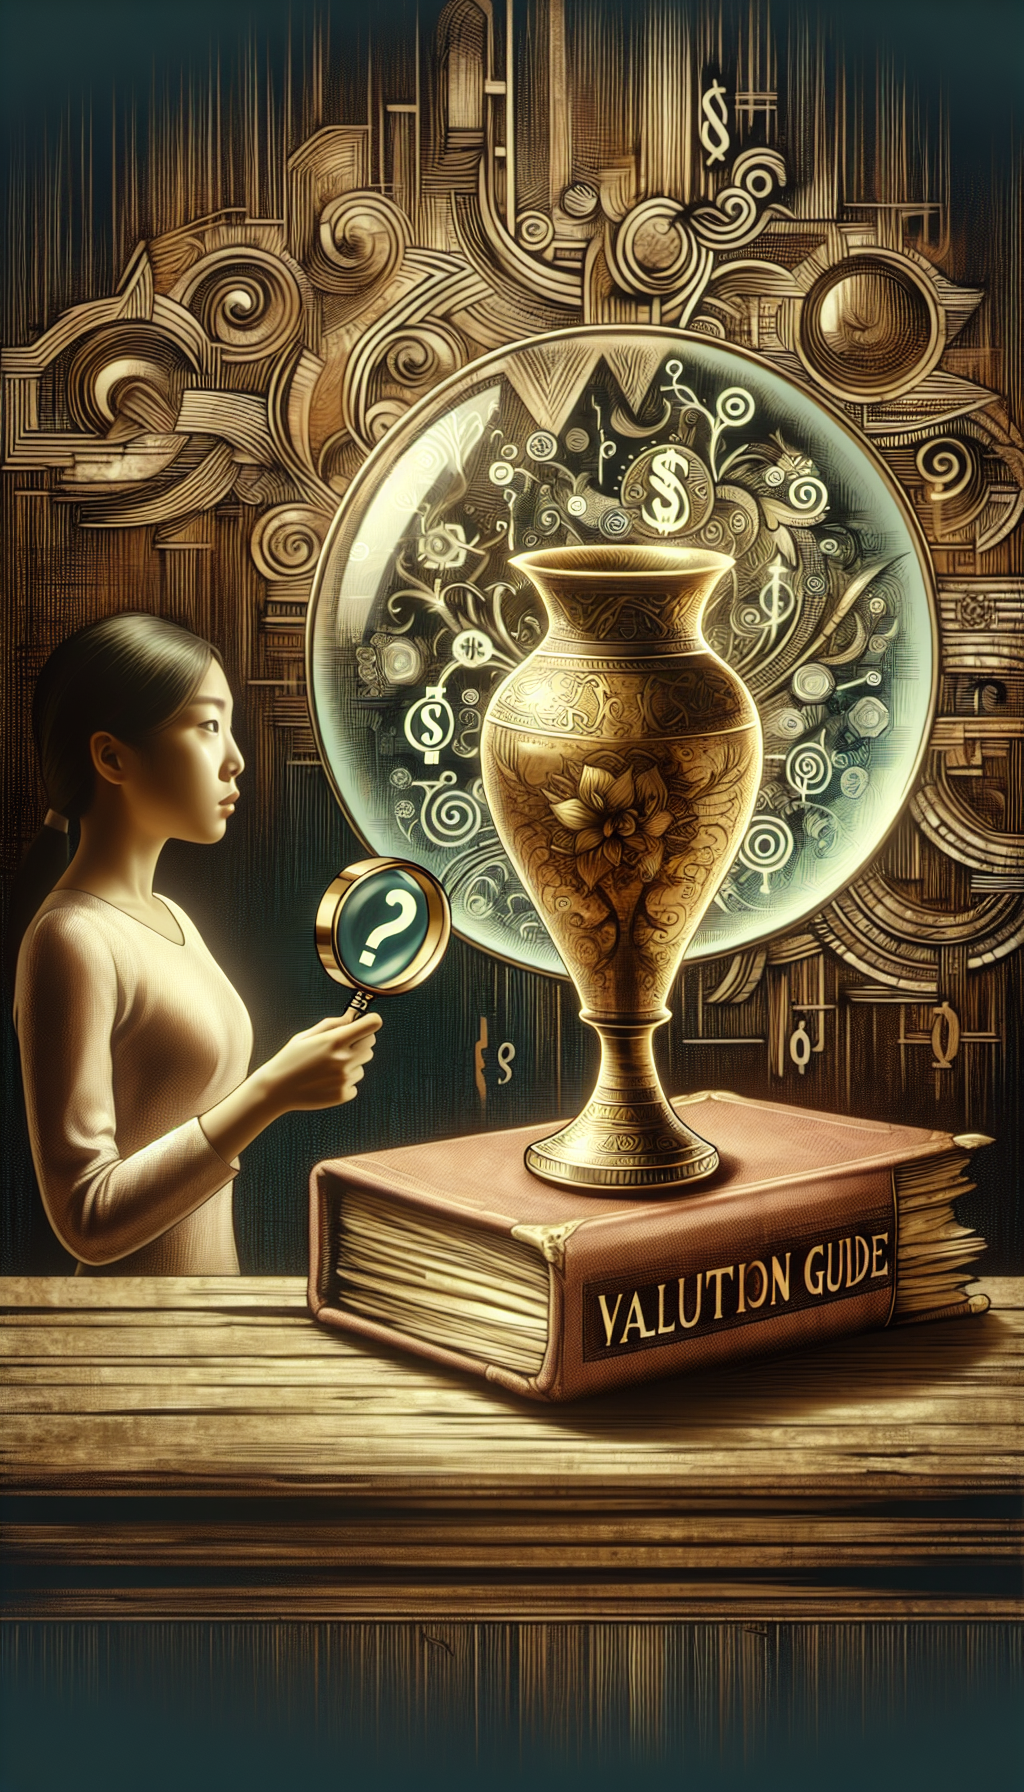 A magnifying glass held by a graceful hand hovers over intricate inscriptions etched into a lustrous antique brass vase, with dollar signs and question marks subtly blending into the ornate patterns. The vase sits atop an old book labeled "Valuation Guide," hinting at secrets waiting to be decoded to reveal the object's worth. The style alternates between photo-realism for the vase and hand-drawn elements for the imaginative details.